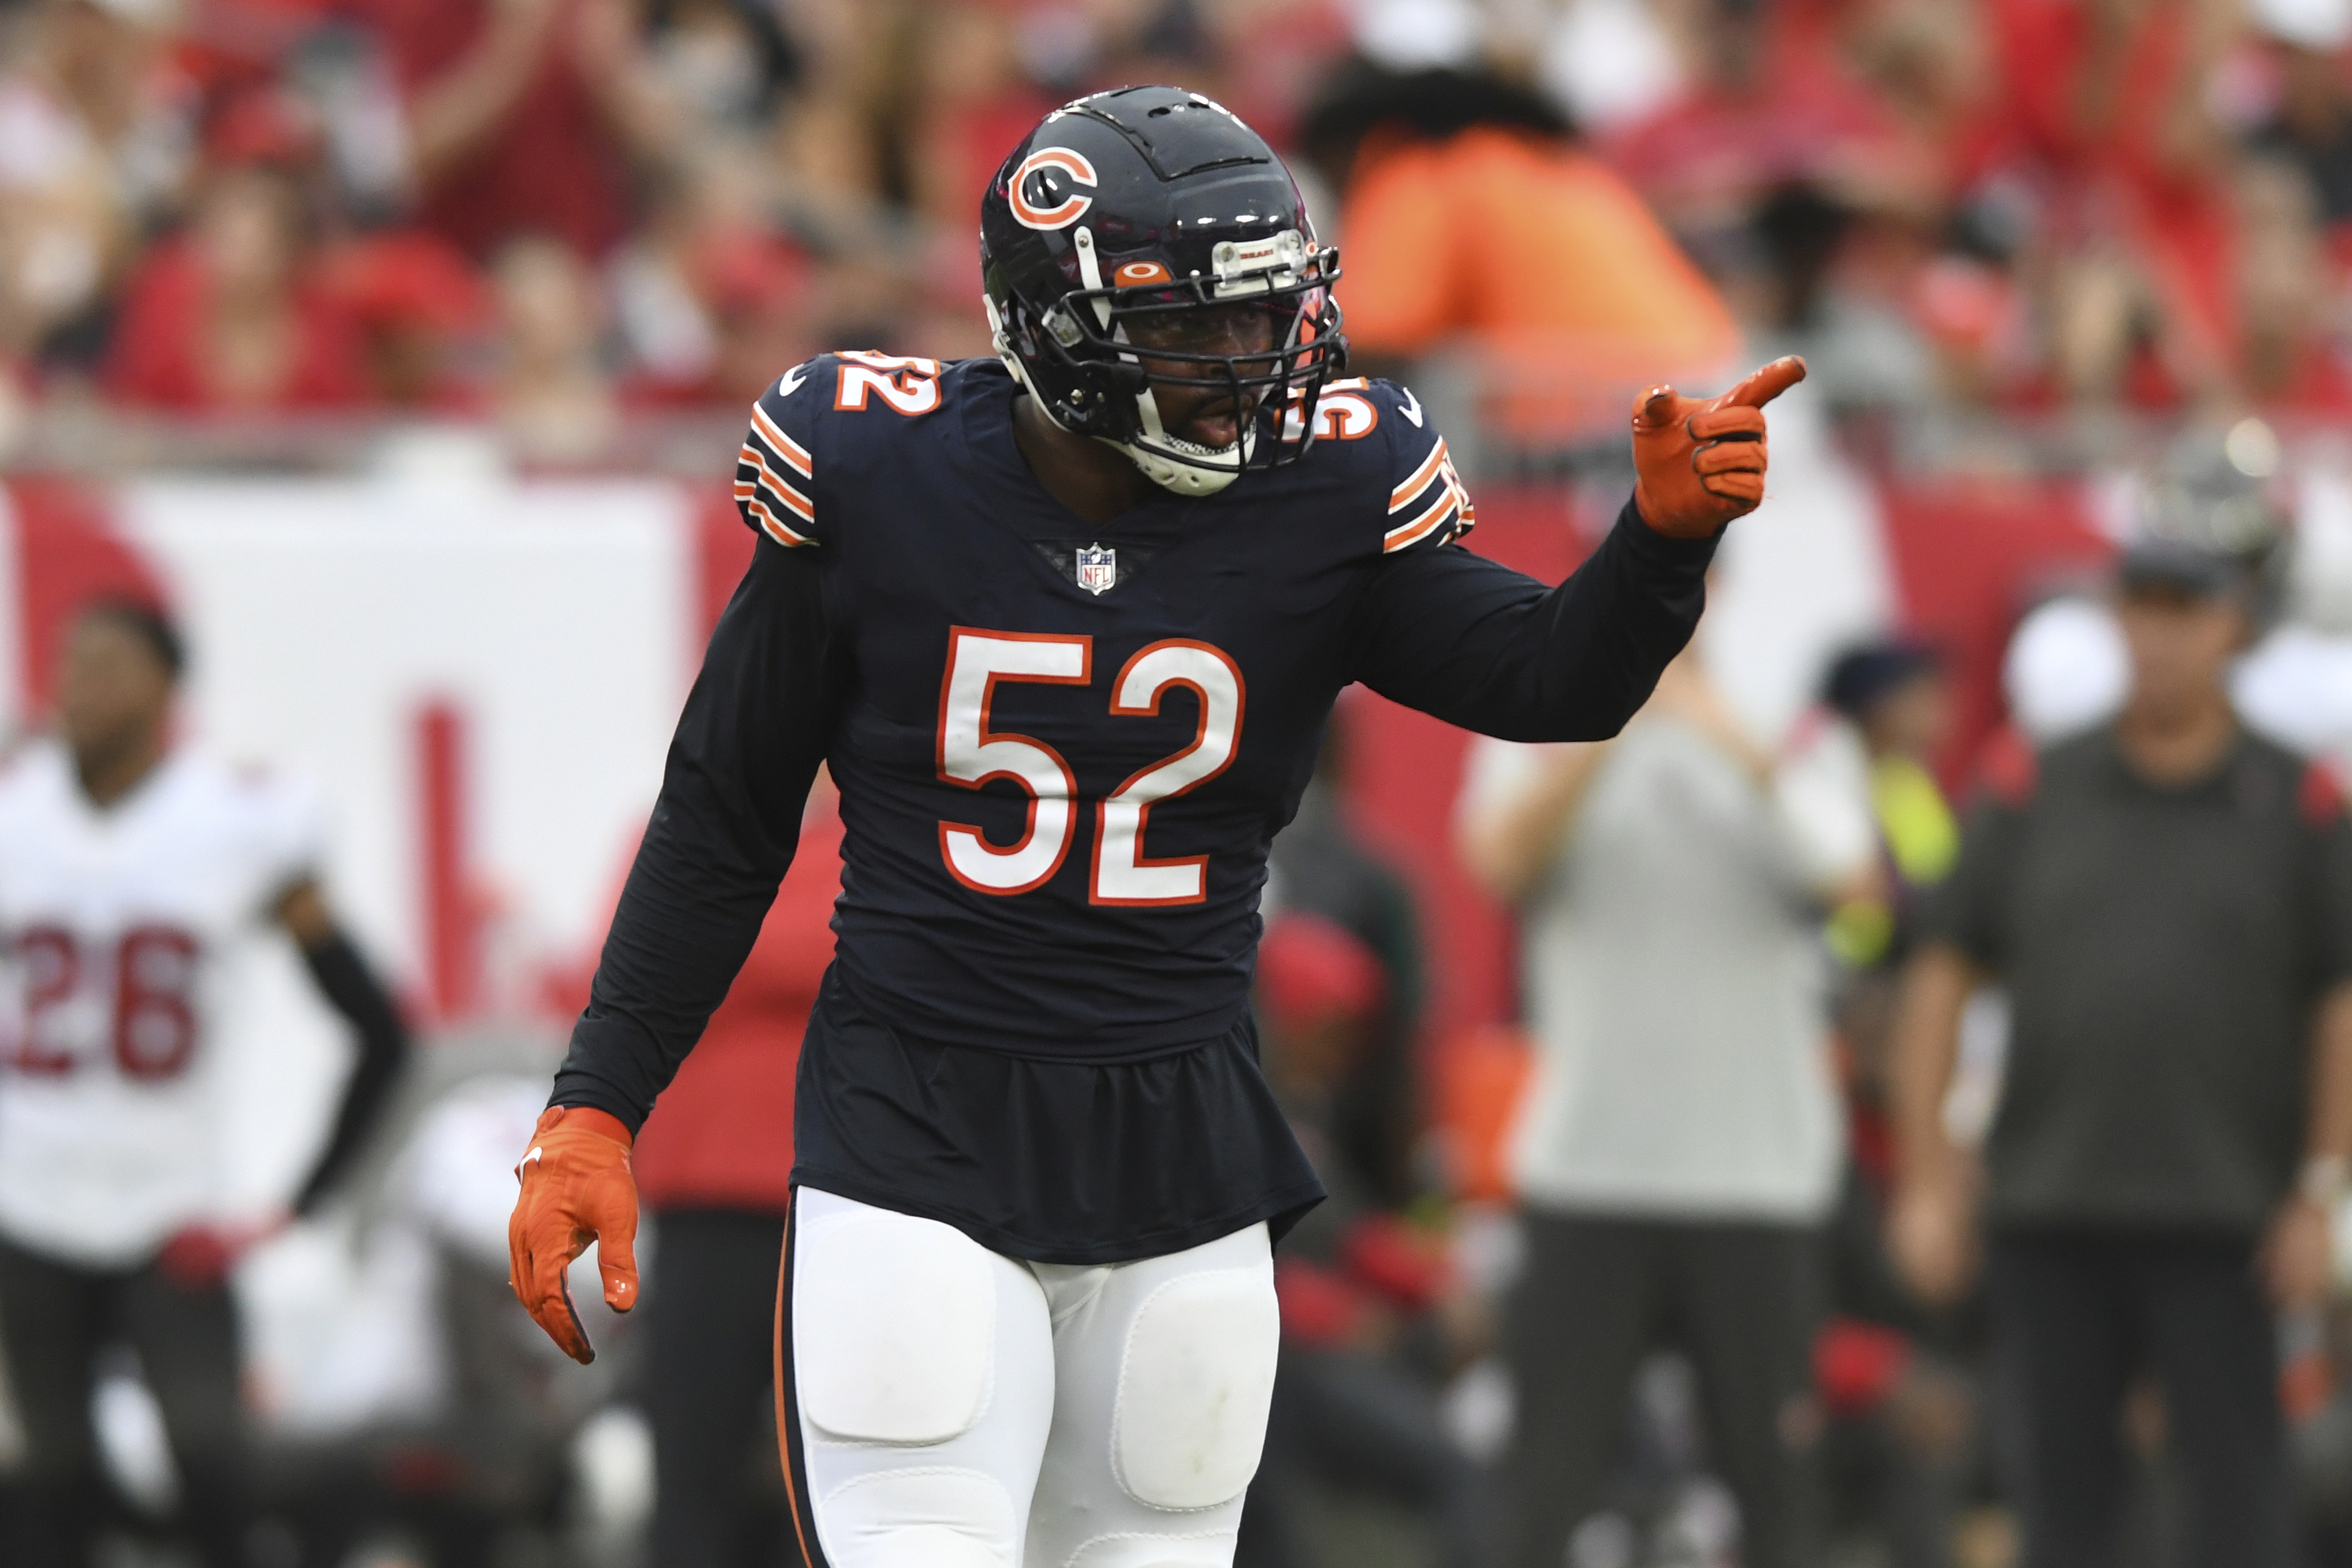 Report: Khalil Mack Traded to Chargers; Bears to Receive Draft Picks in Return